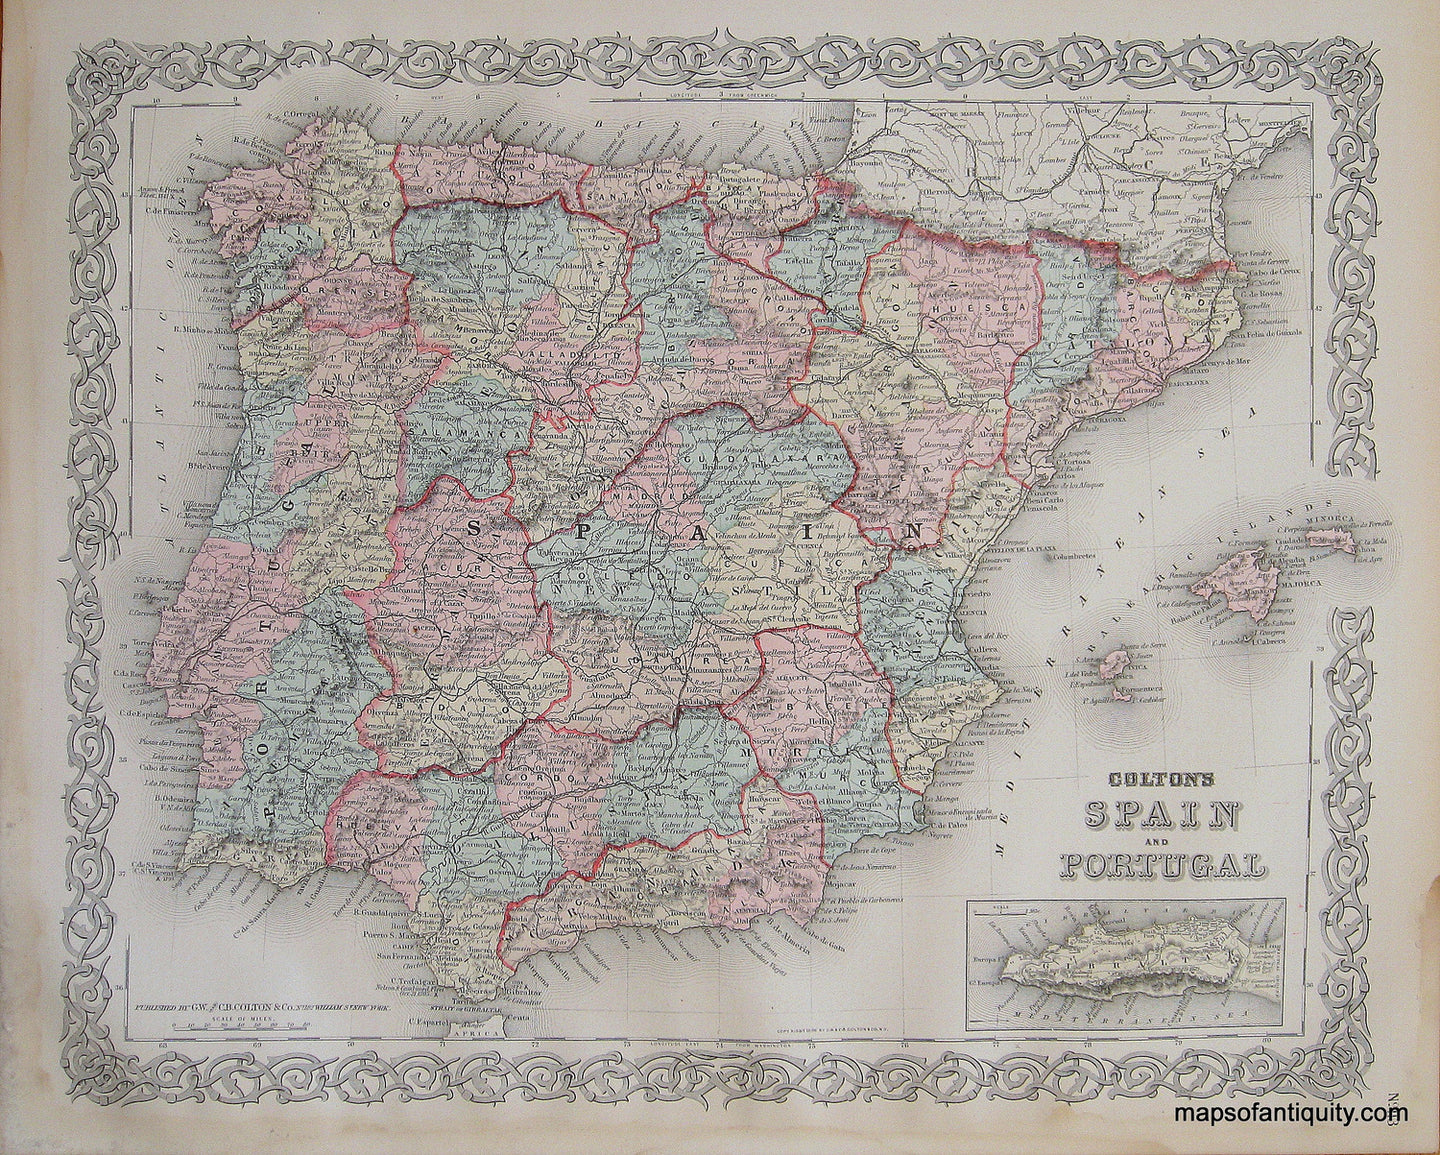 Antique-Hand-Colored-Map-Colton's-Spain-and-Portugal-Europe-Spain-and-Portugal-1887-Colton-Maps-Of-Antiquity